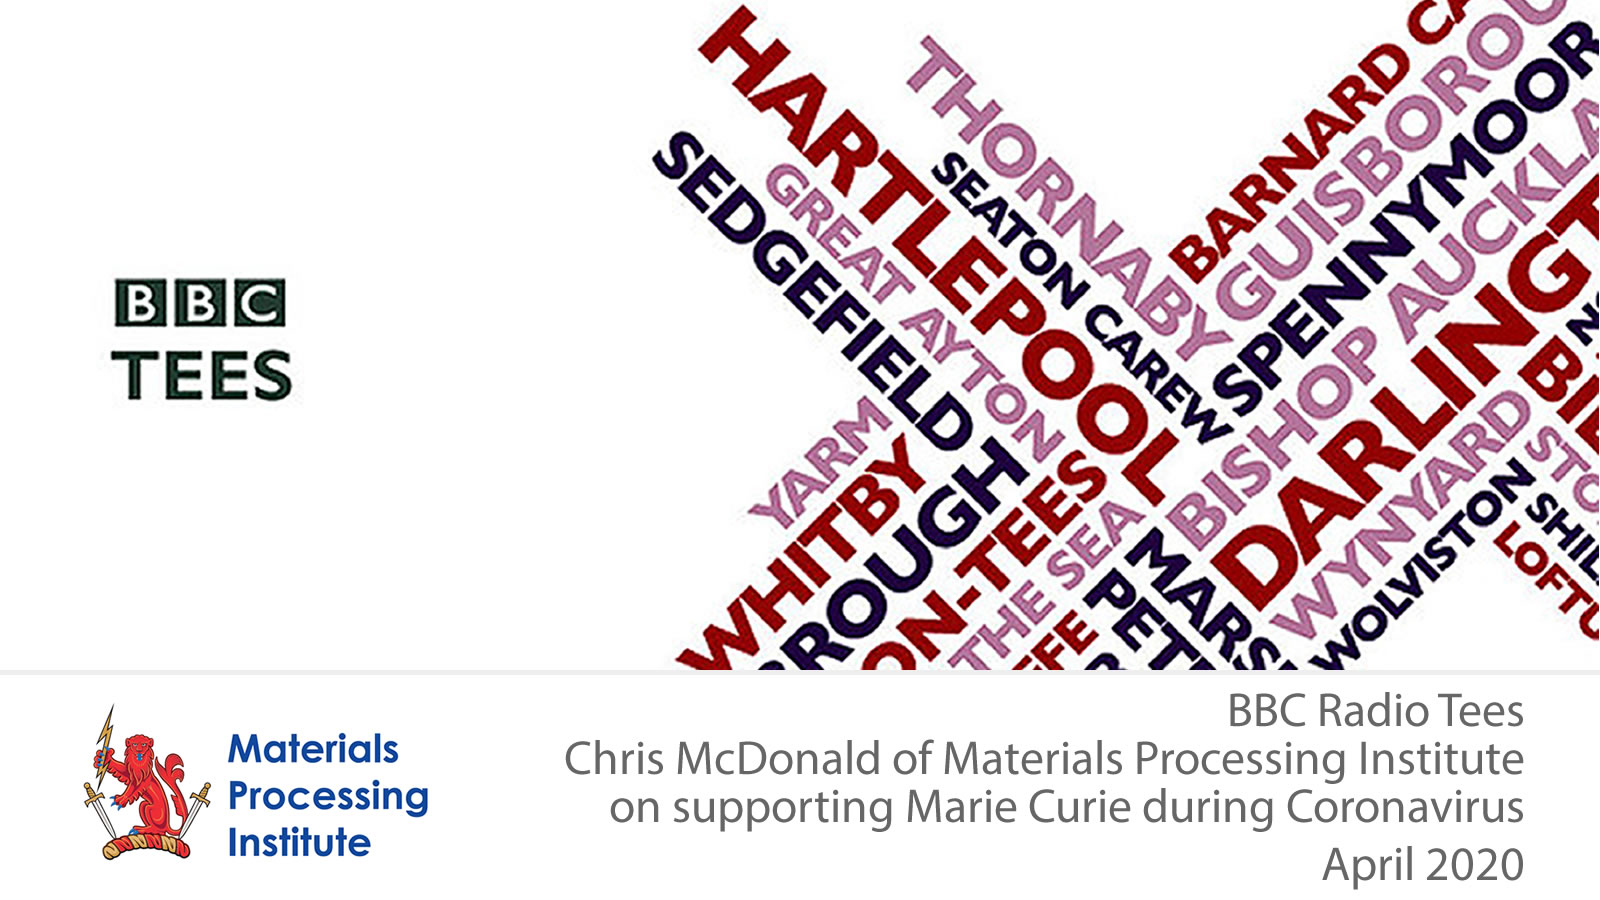 Chris McDonald of Materials Processing Institute on supporting Marie Curie during Coronavirus - April 2020